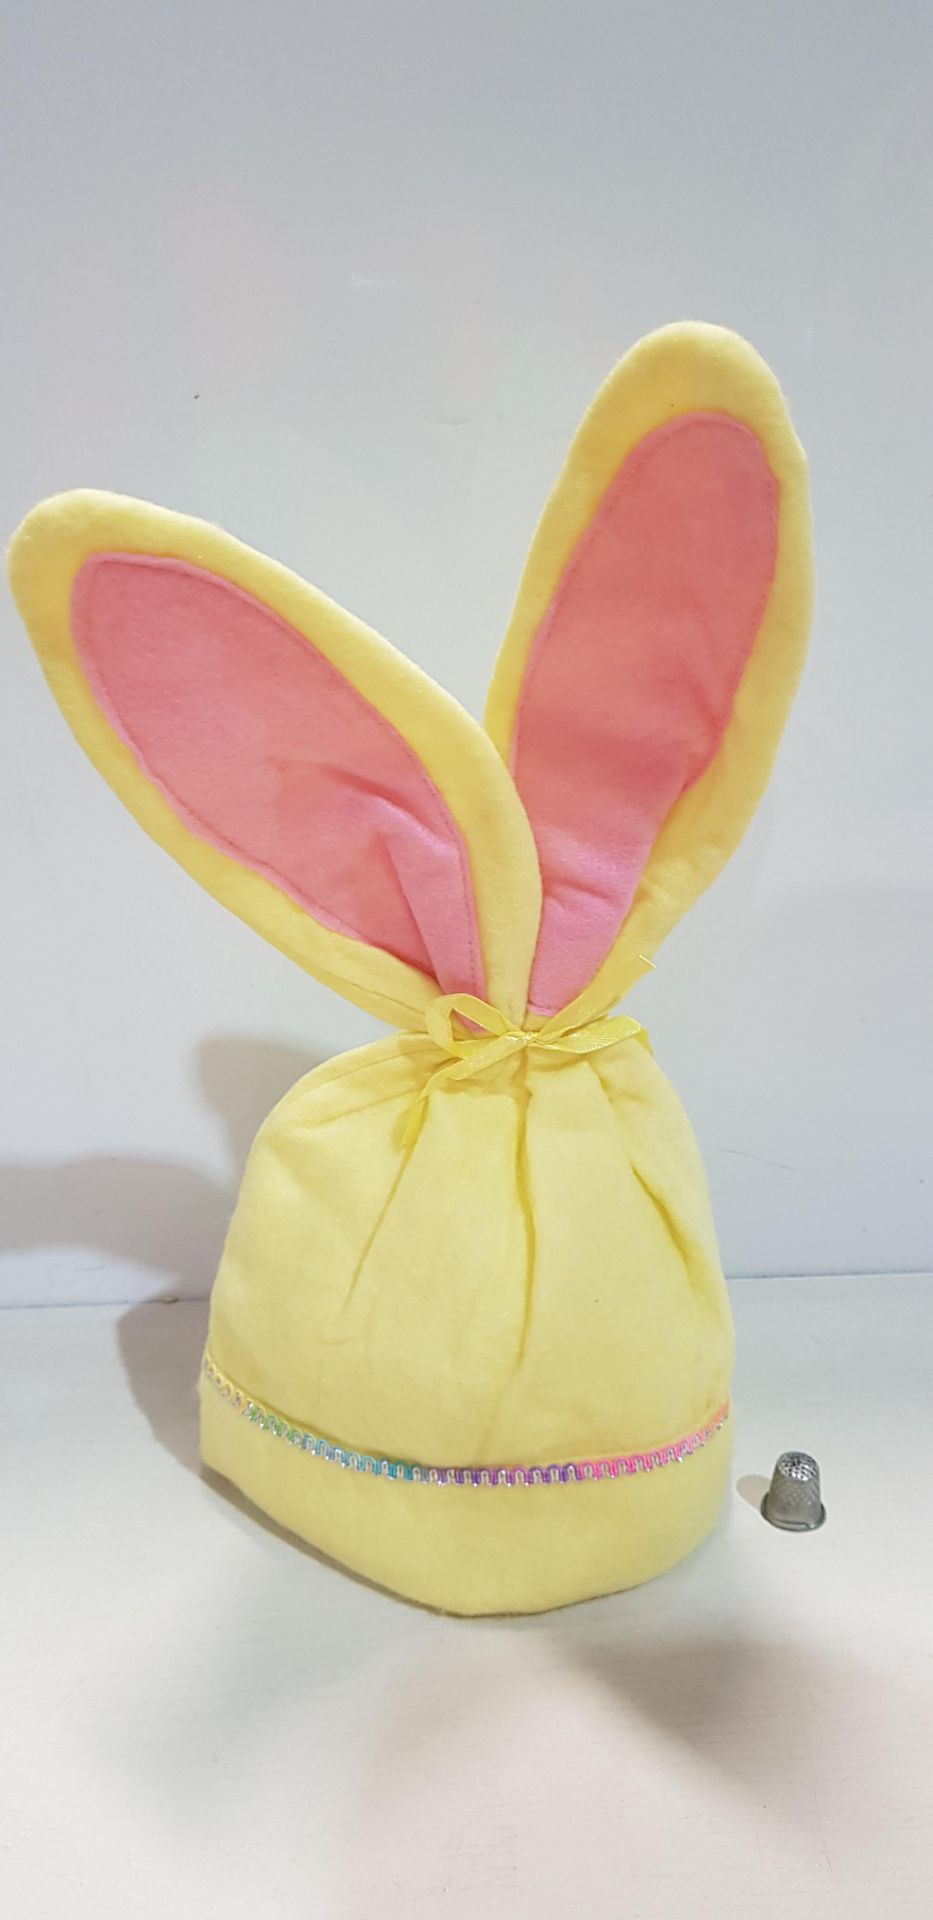 150 X BRAND NEW YELLOW EASTER RABBIT HATS IN 1 BOX